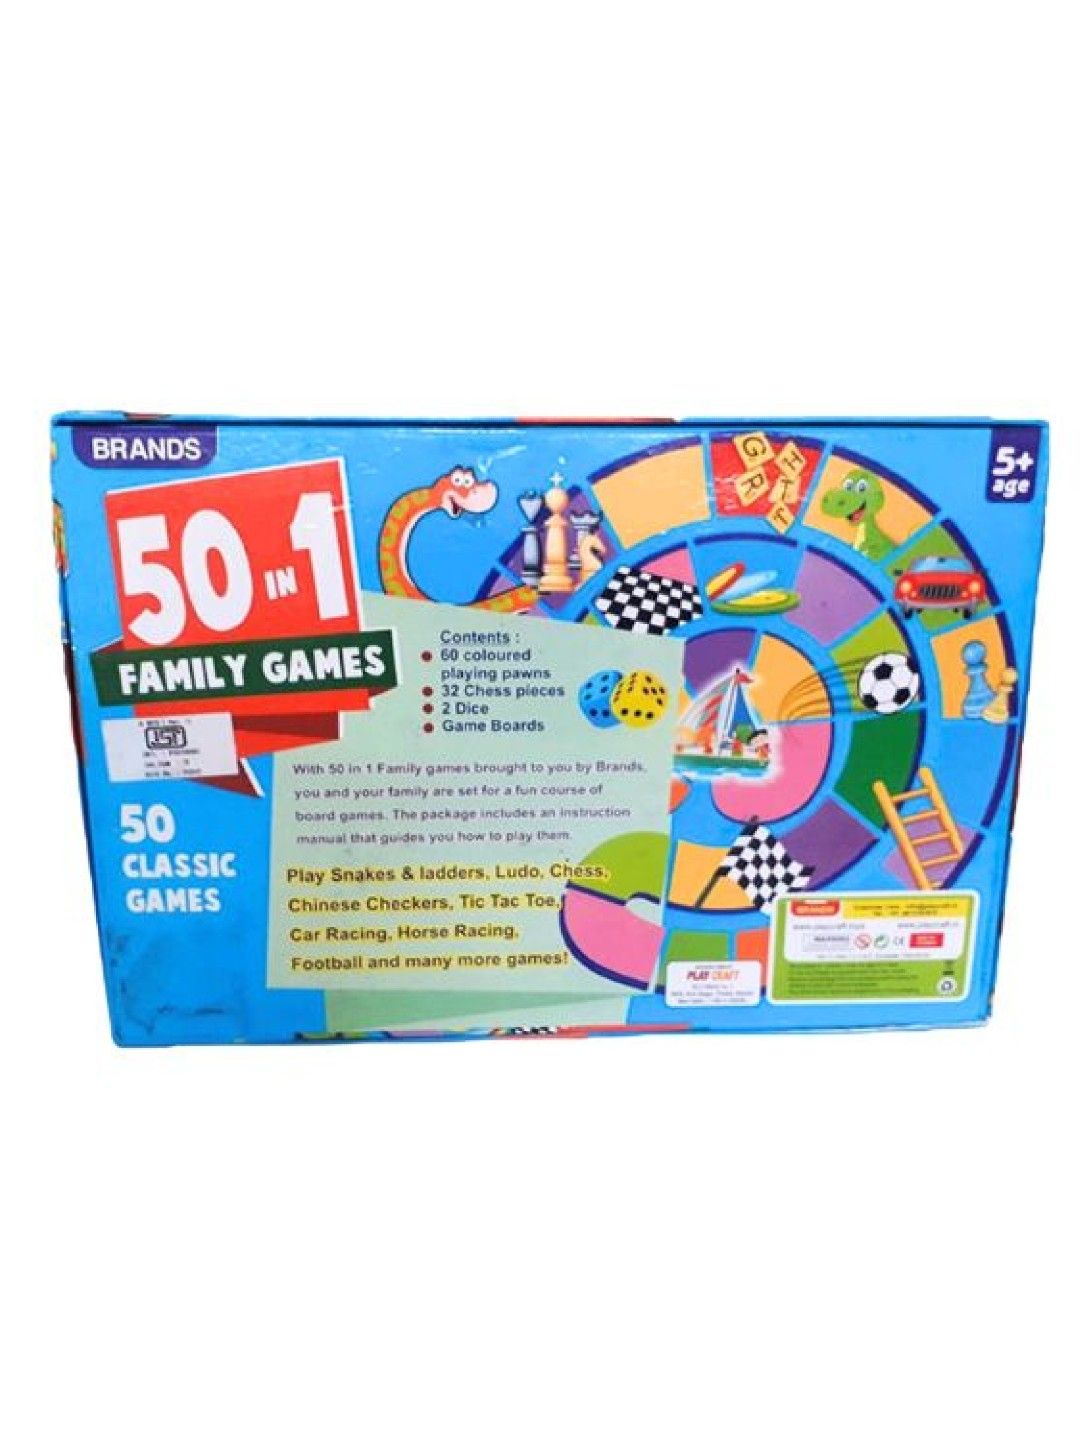 Playcraft 50 in 1 Family Games (No Color- Image 2)